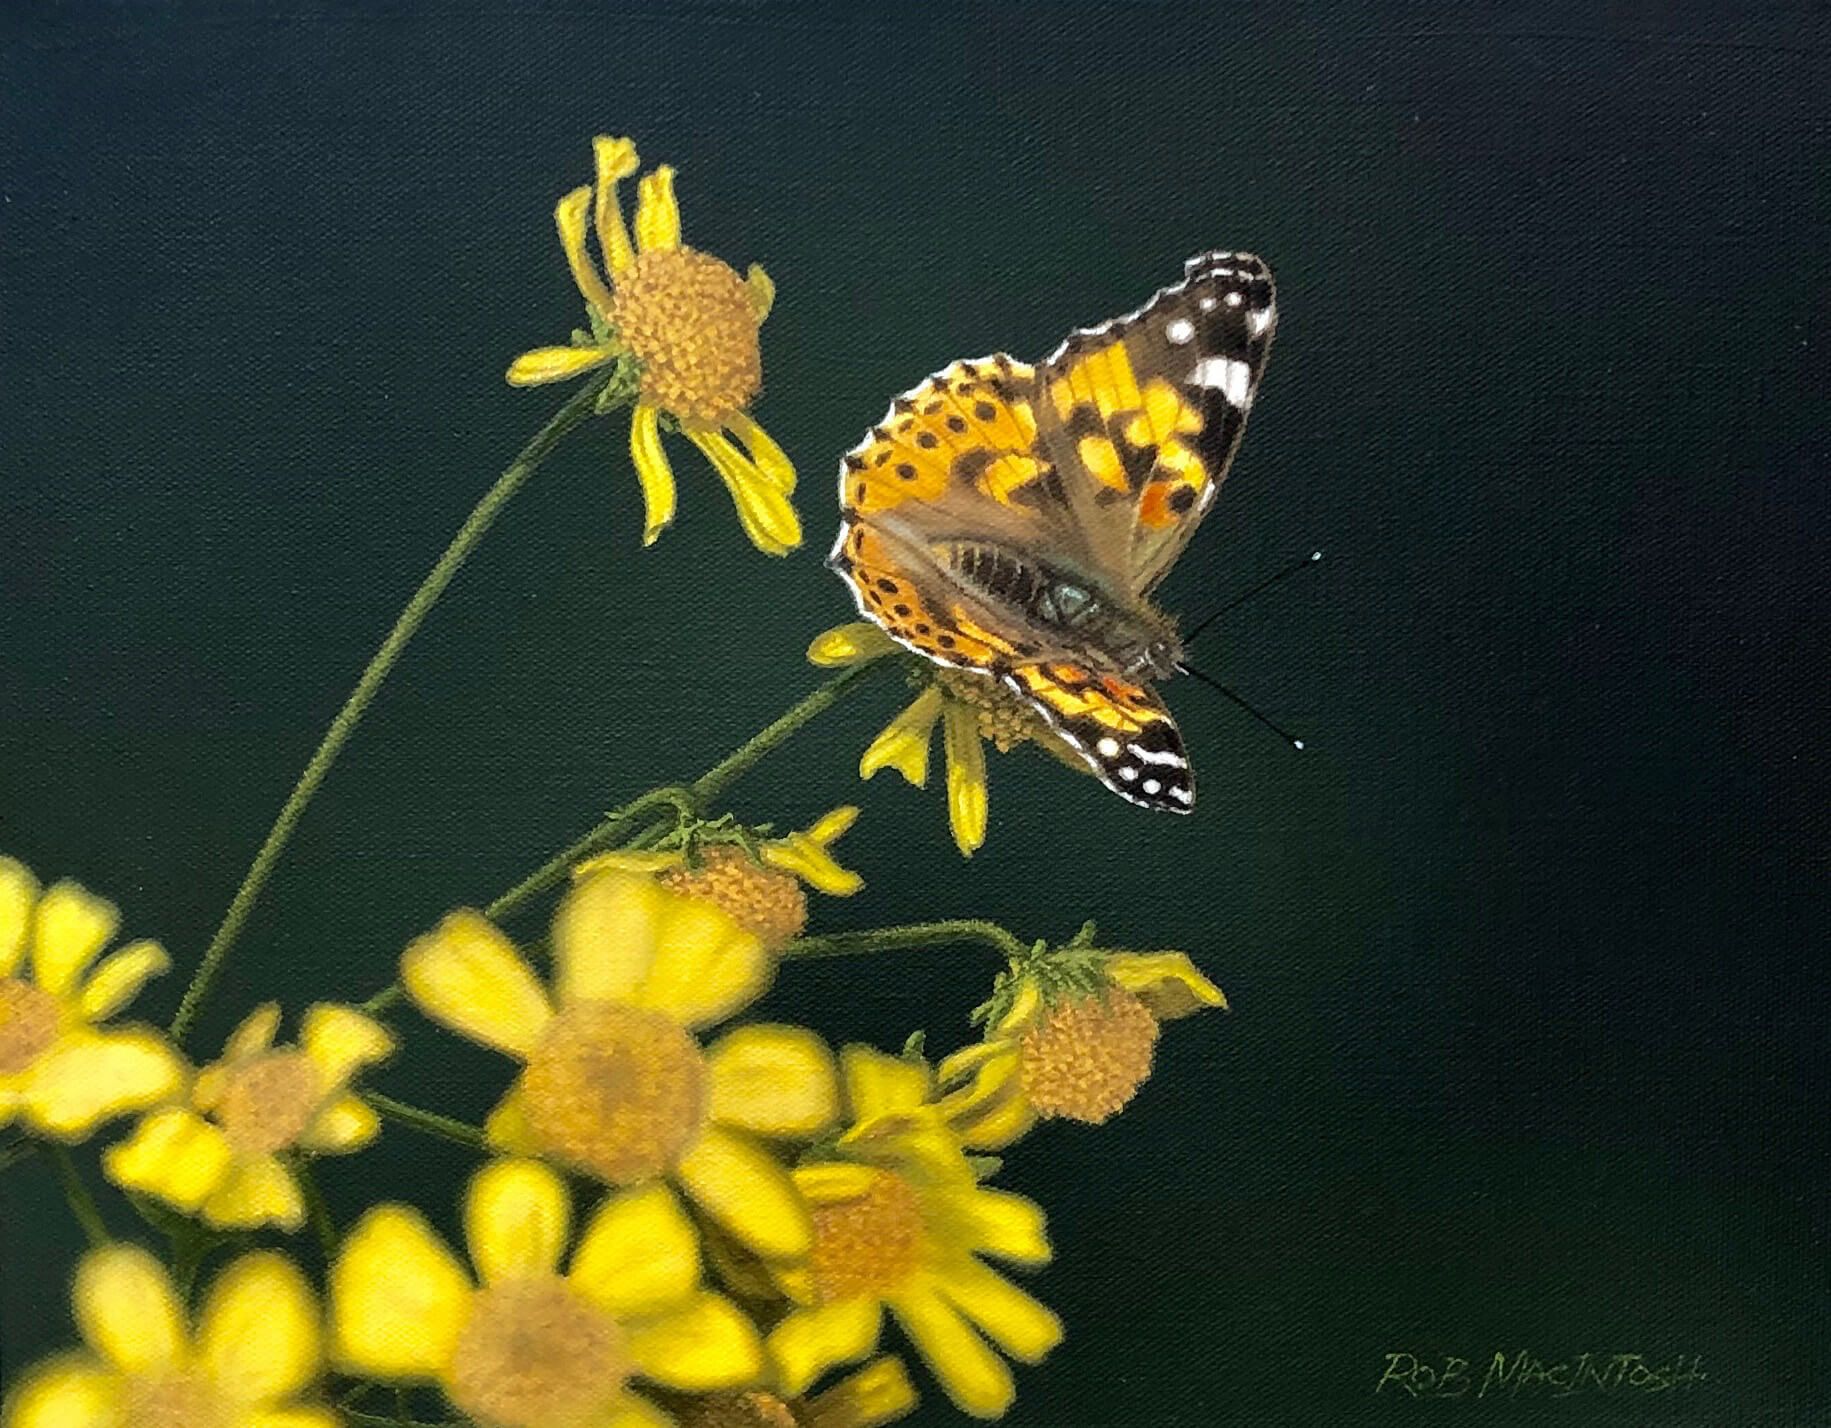 Photorealistic painting of a butterfly on a dandelion